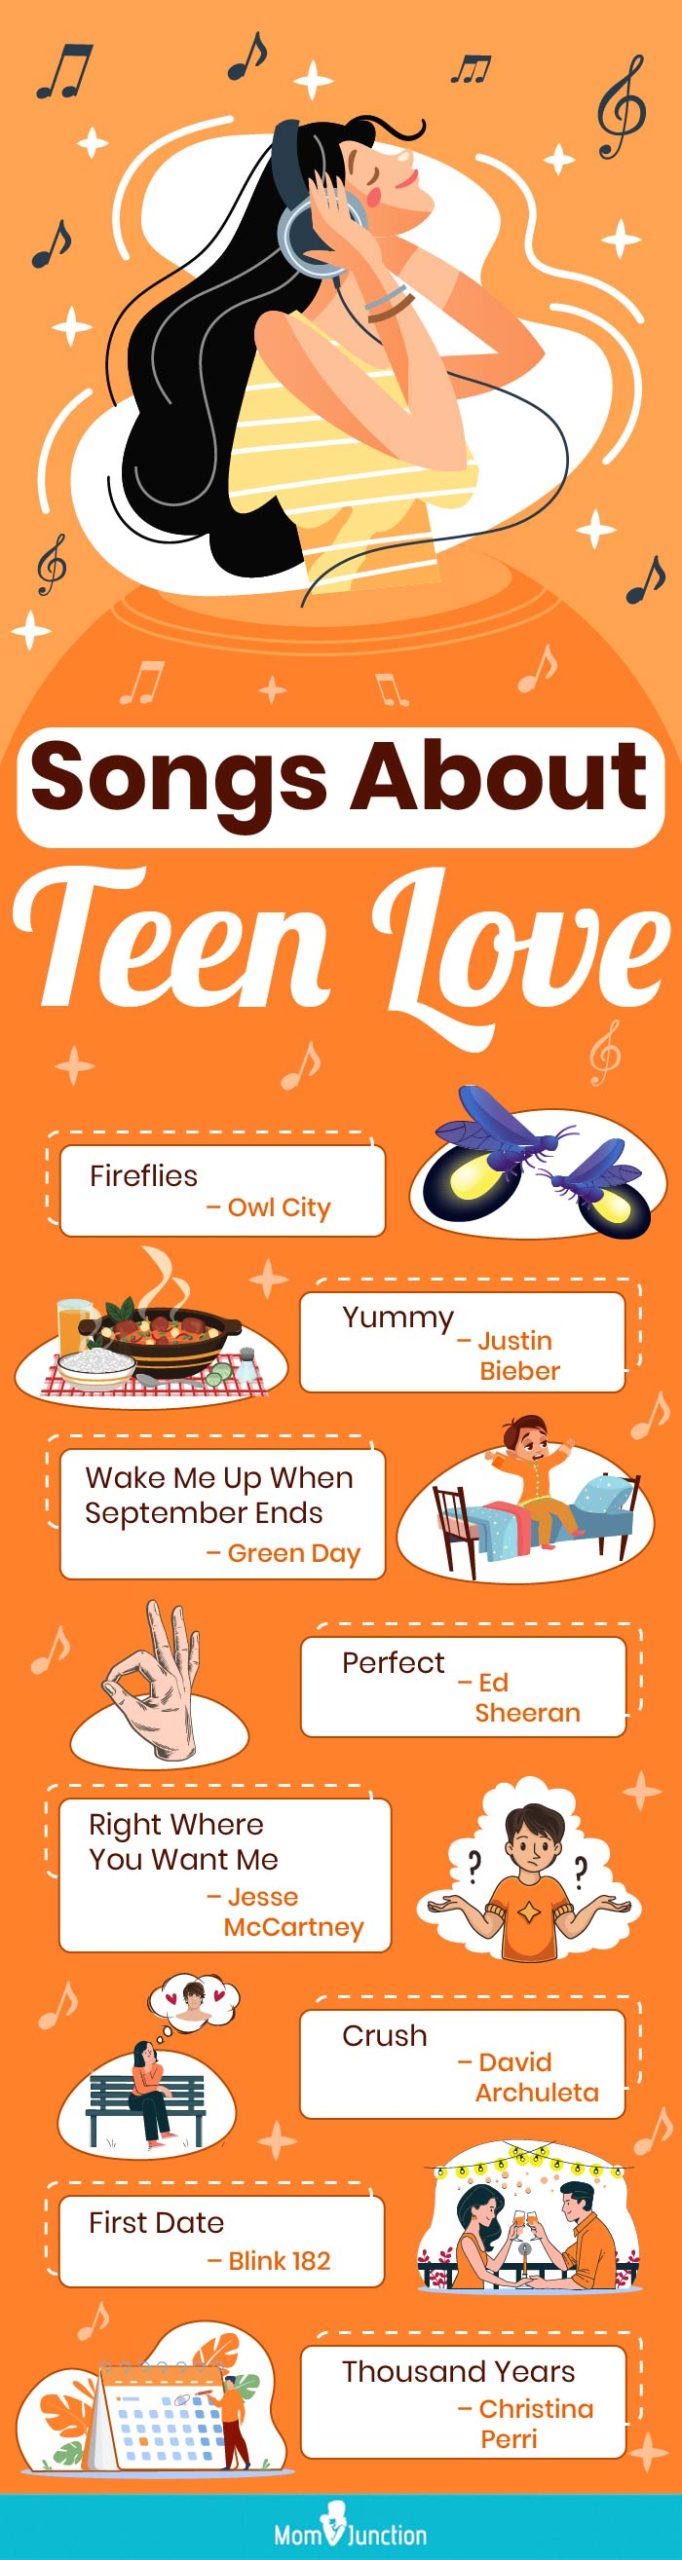 songs about teen love [infographic]